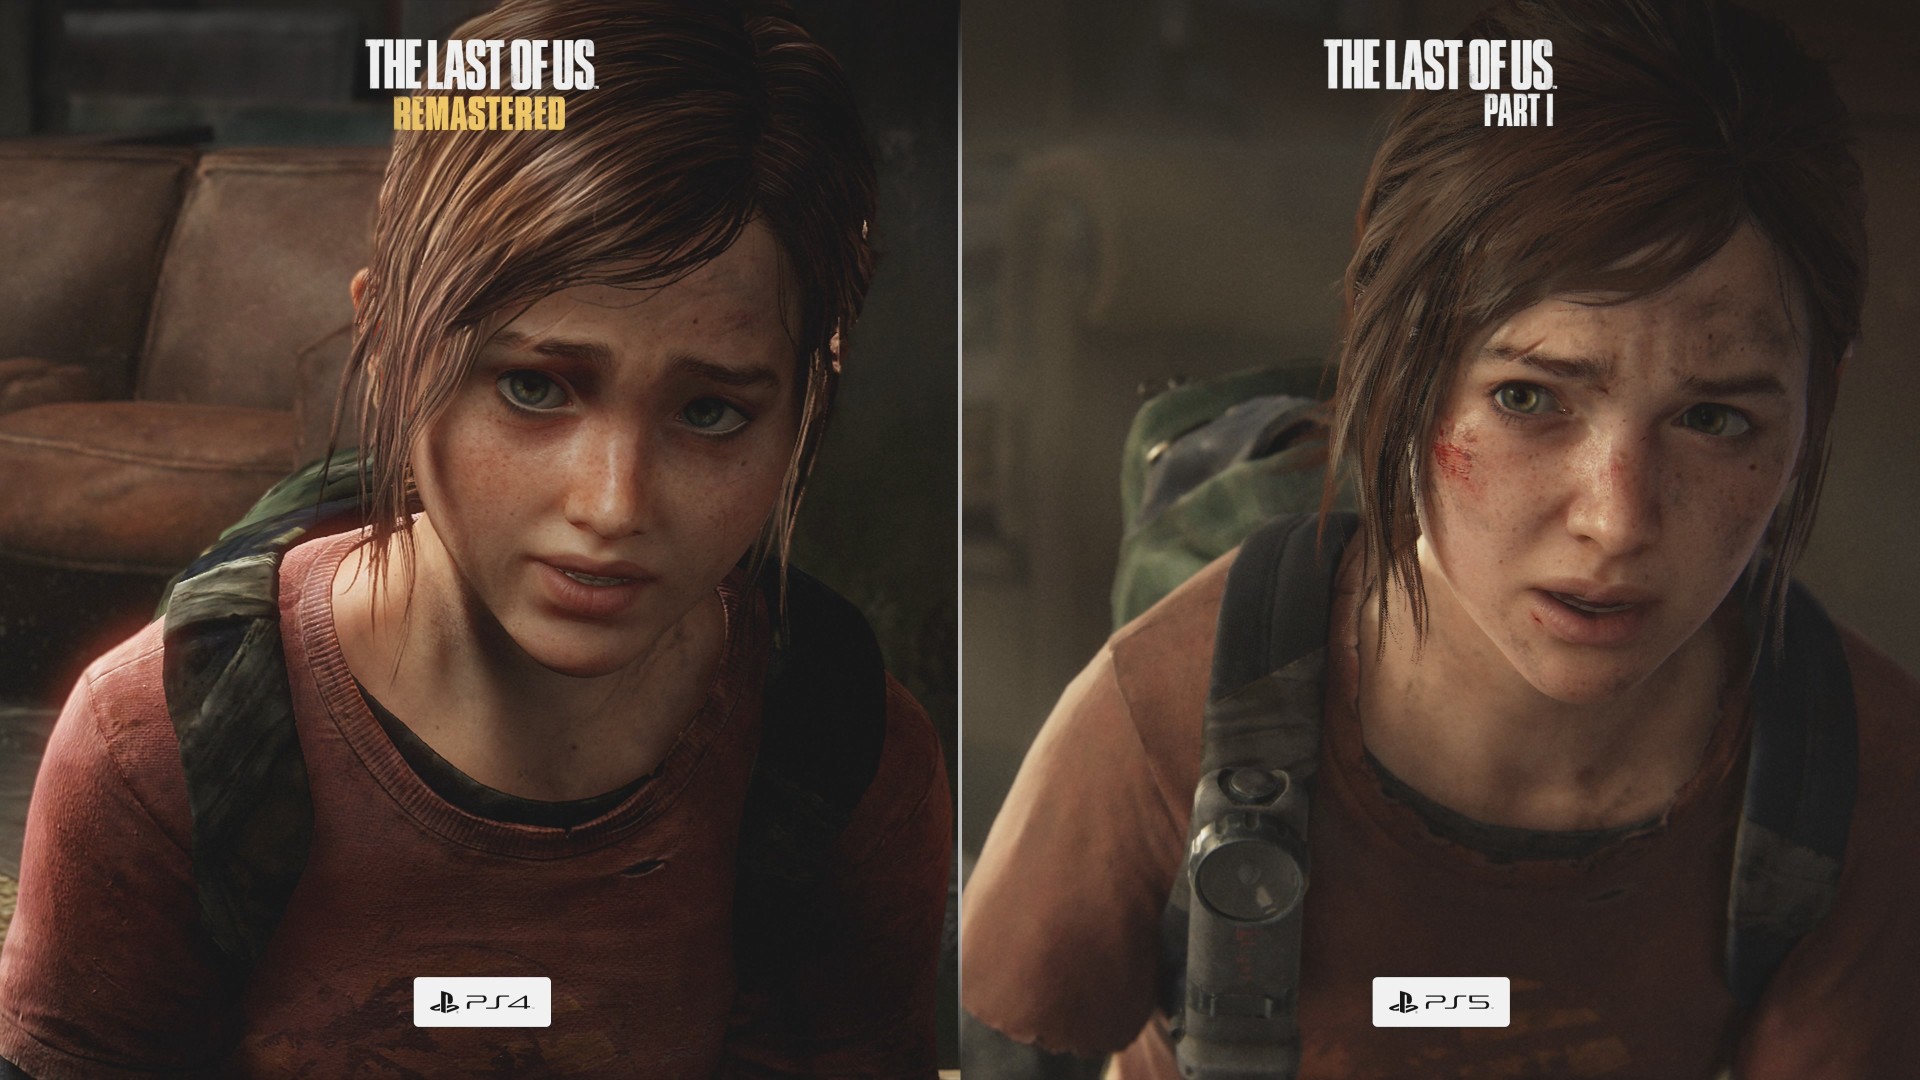 Naughty Dog Reveals New The Last of Us 2 Poster; Dynamic PS4 Theme Based on  Reveal Trailer Inbound